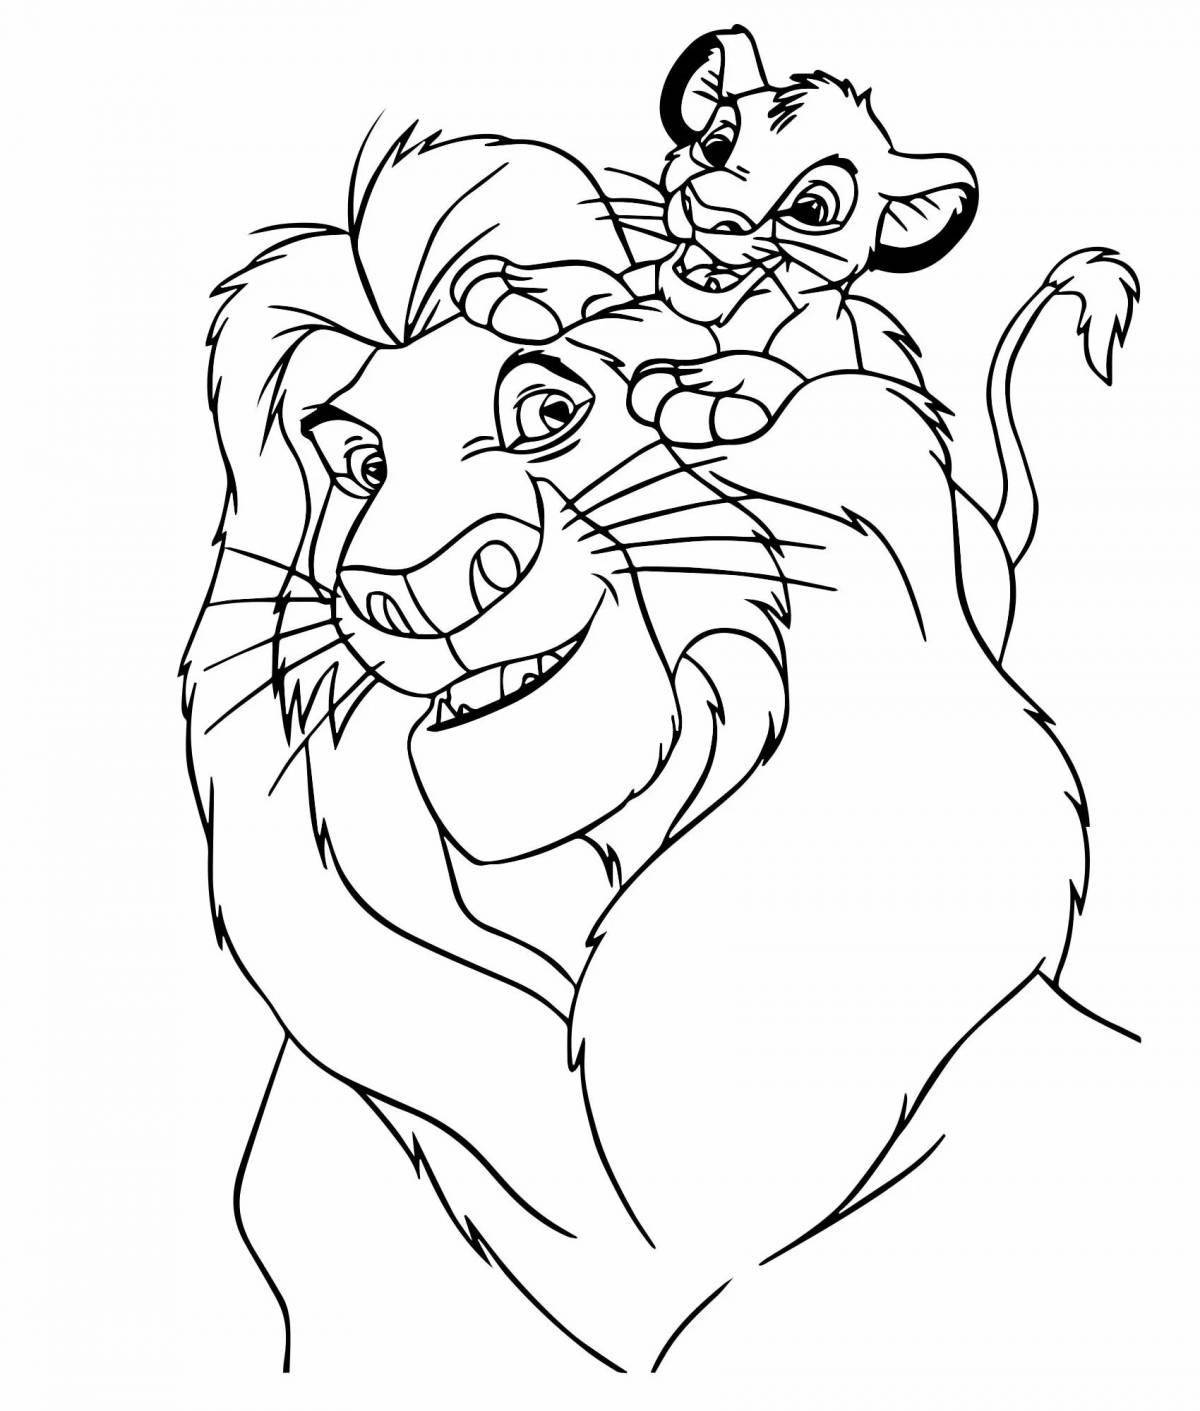 Great lion king coloring book for kids